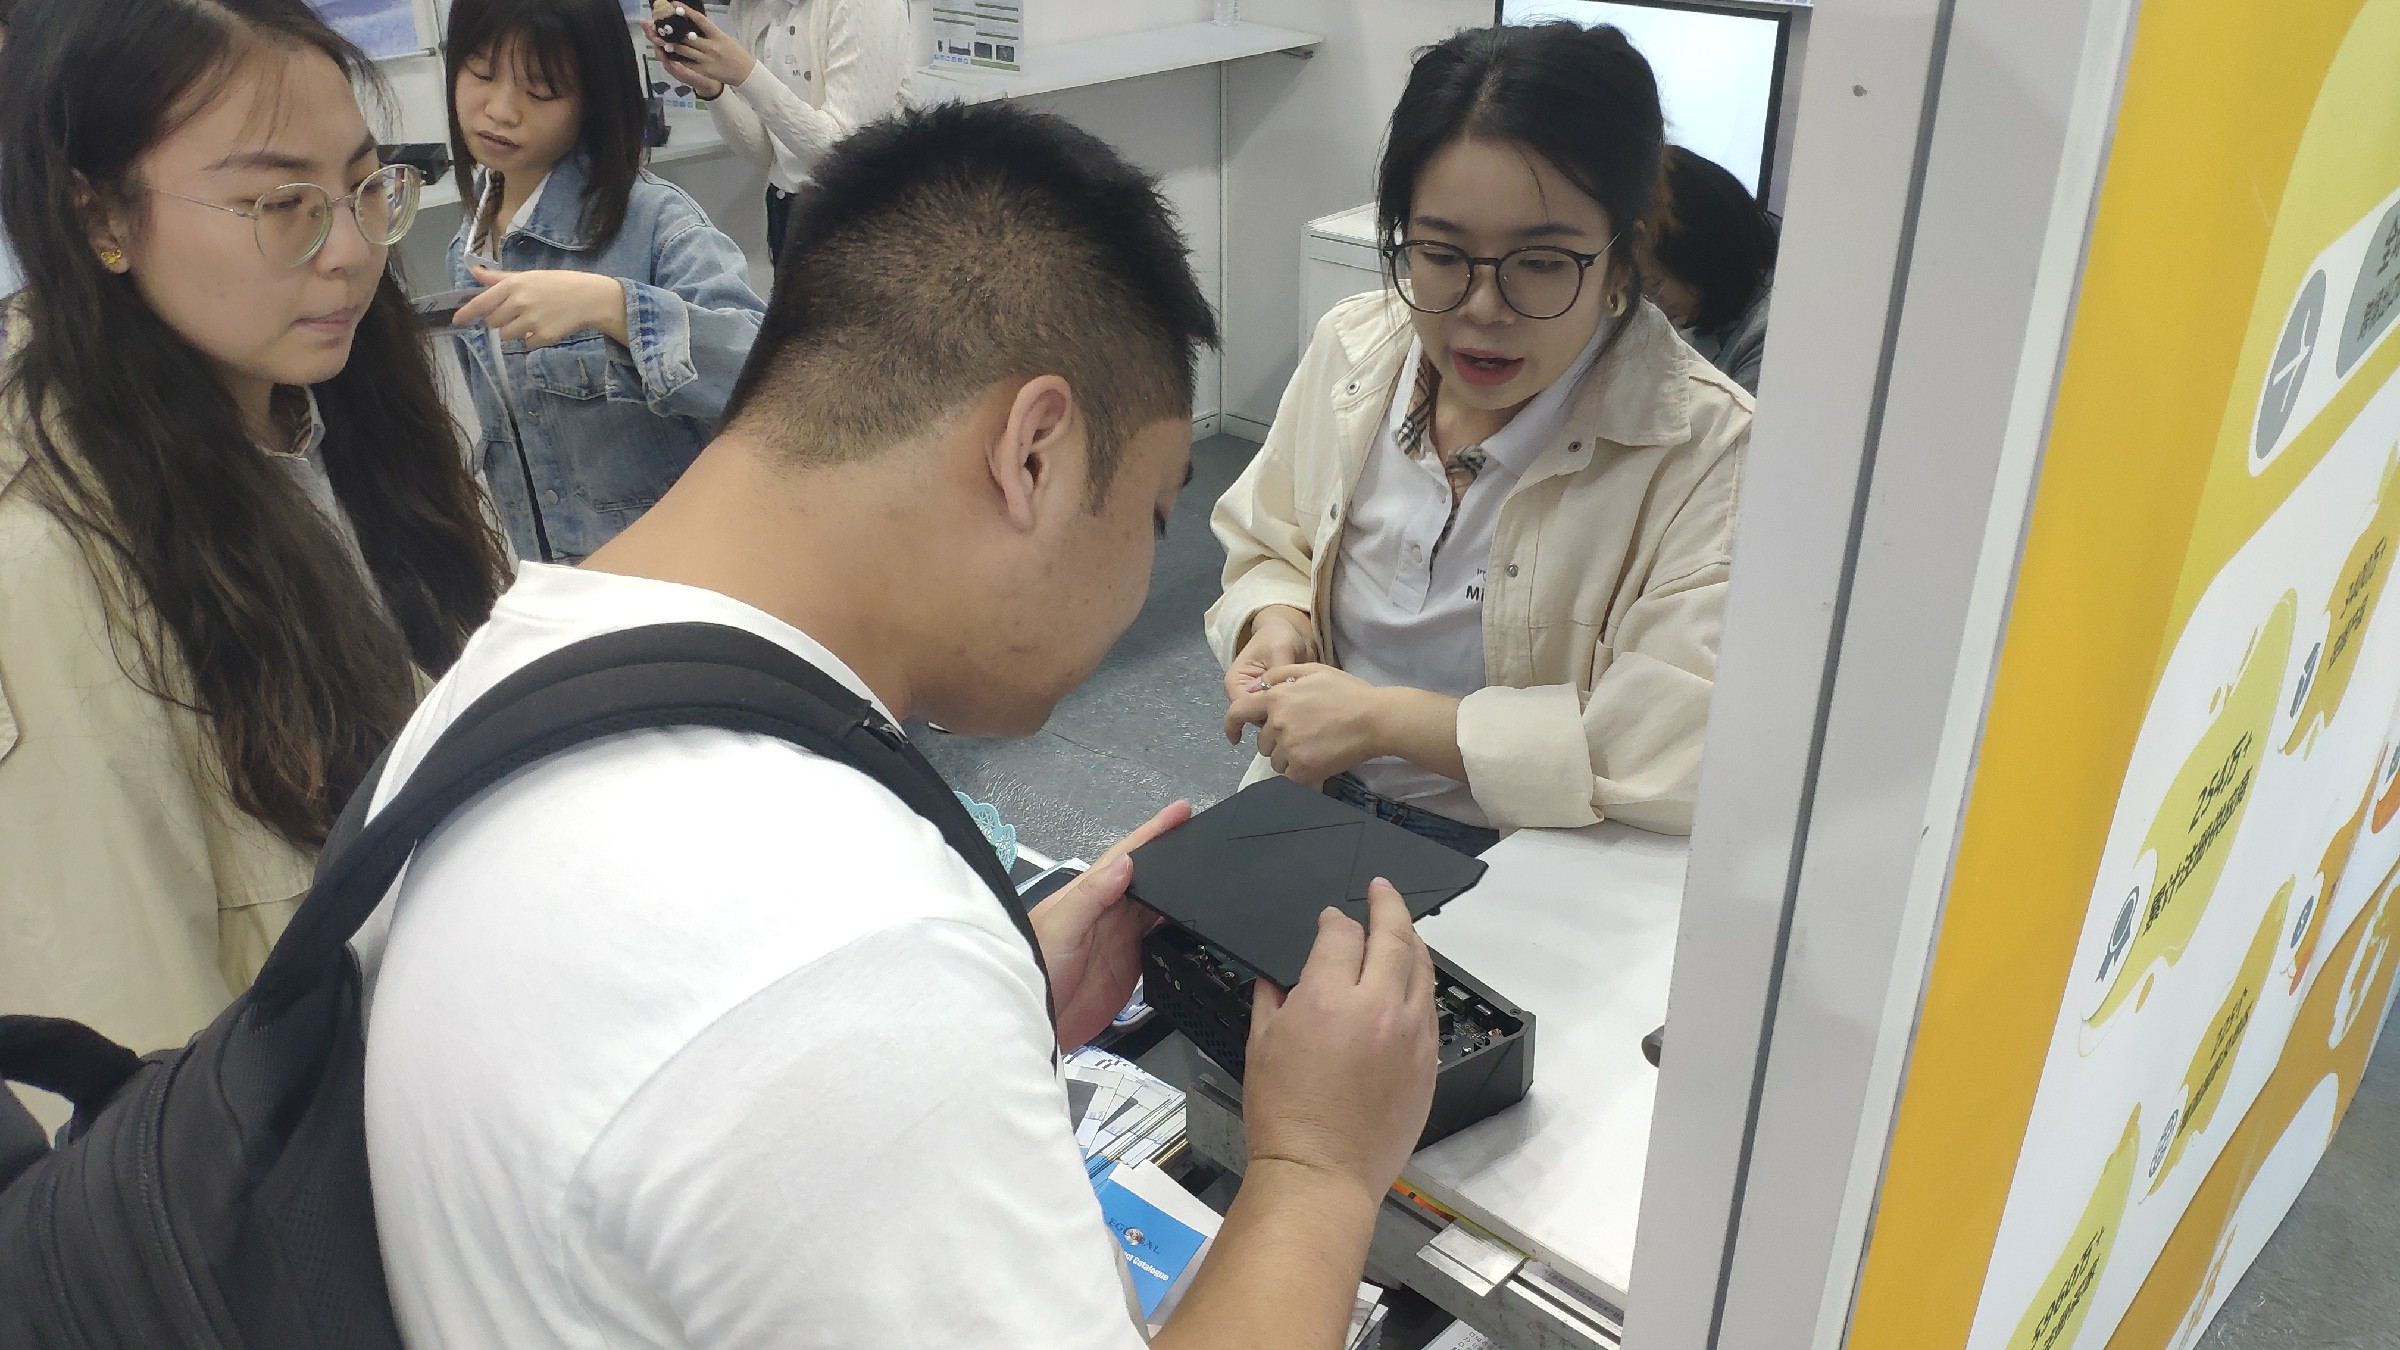 EGSMTPC Mini PC Manufacturer Attends 12.12 Foreign Trade Exhibition In Futian,Shenzhen(图5)